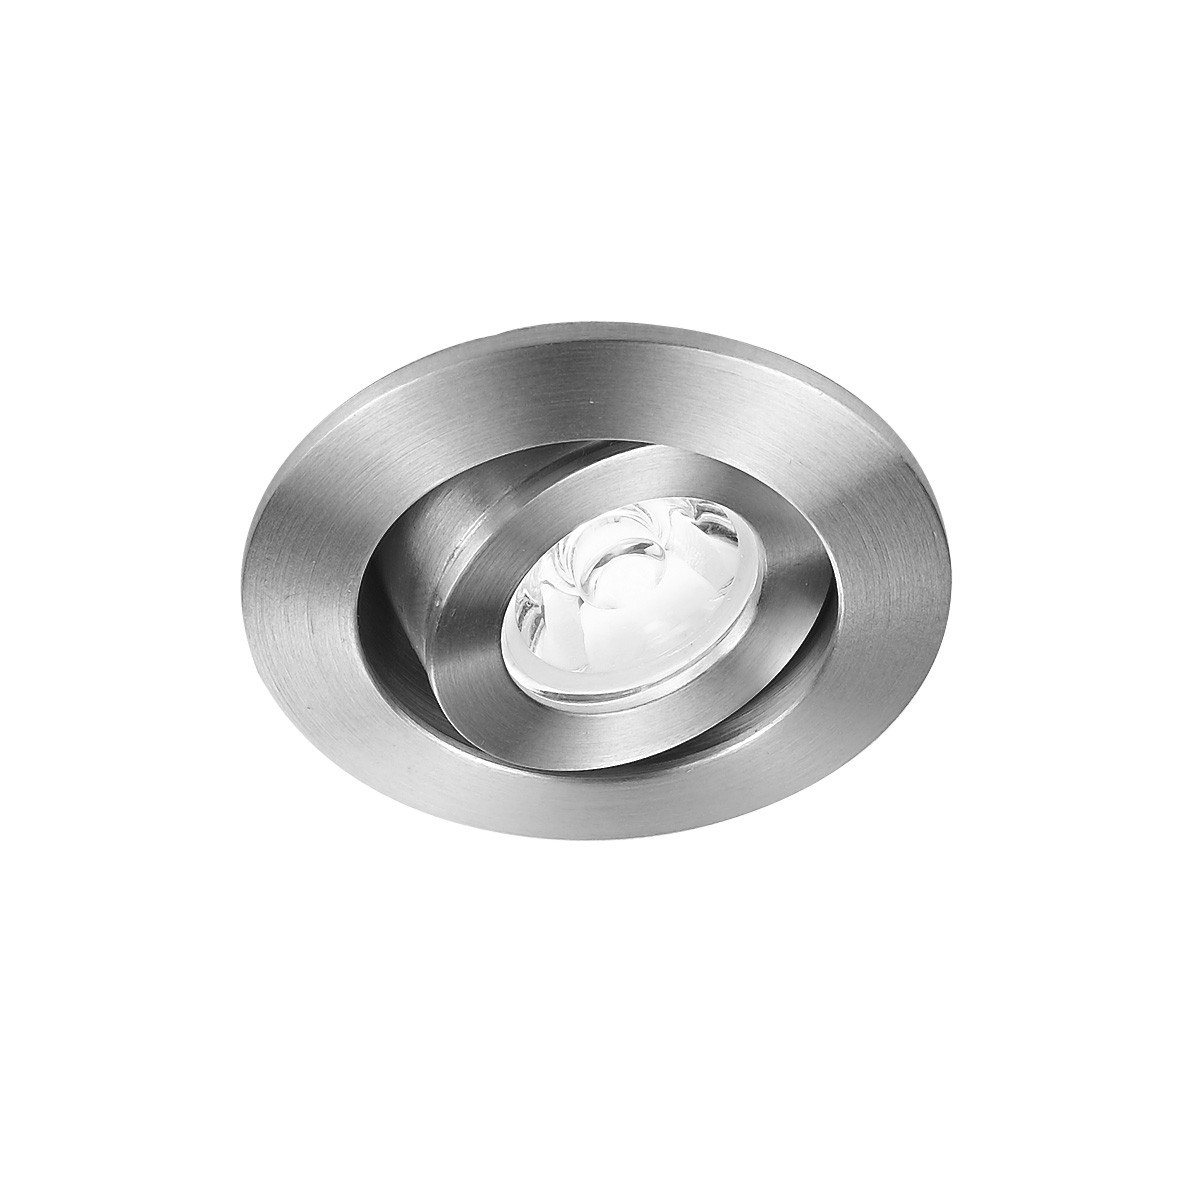 JOLLY – RECESSED LUMINAIRE LED 1X3W 30?